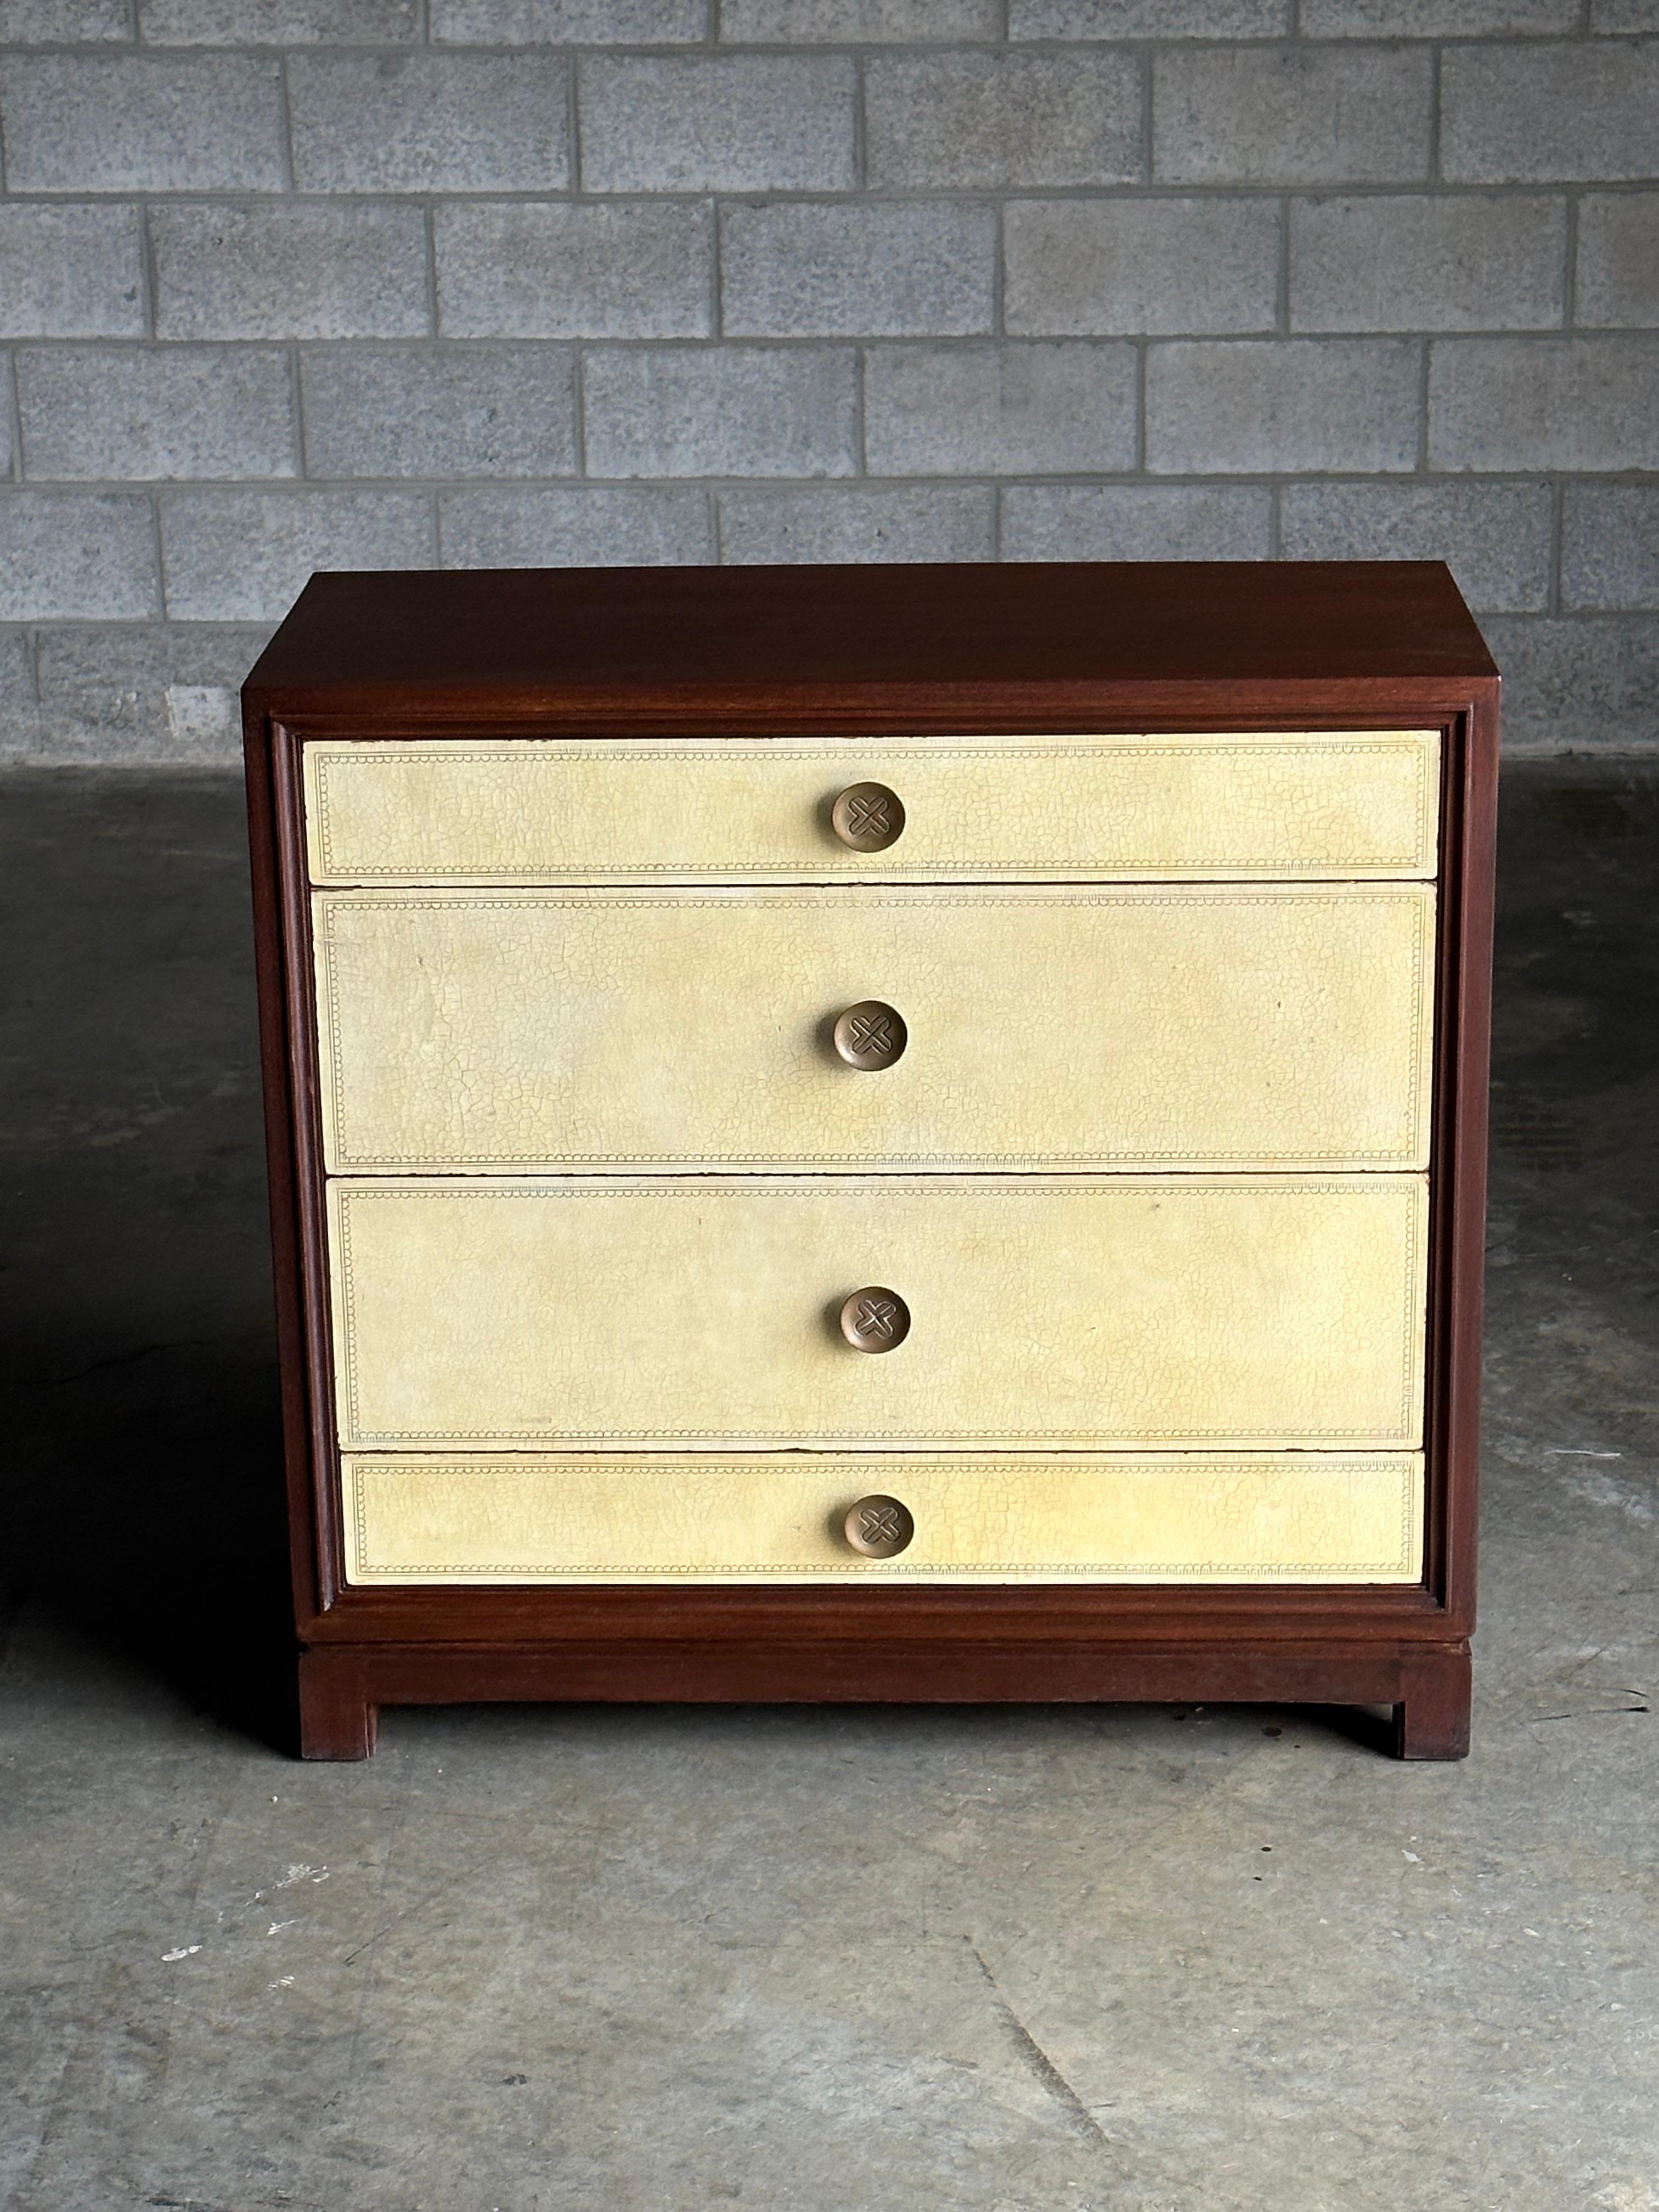 An elegant chest of drawers designed by Tommi Parzinger for Charak Modern. Drawer fronts feature hand tooled yellow/ parchment leather which perfectly compliments the dark wood case. 

The well proportioned size makes for uses throughout many